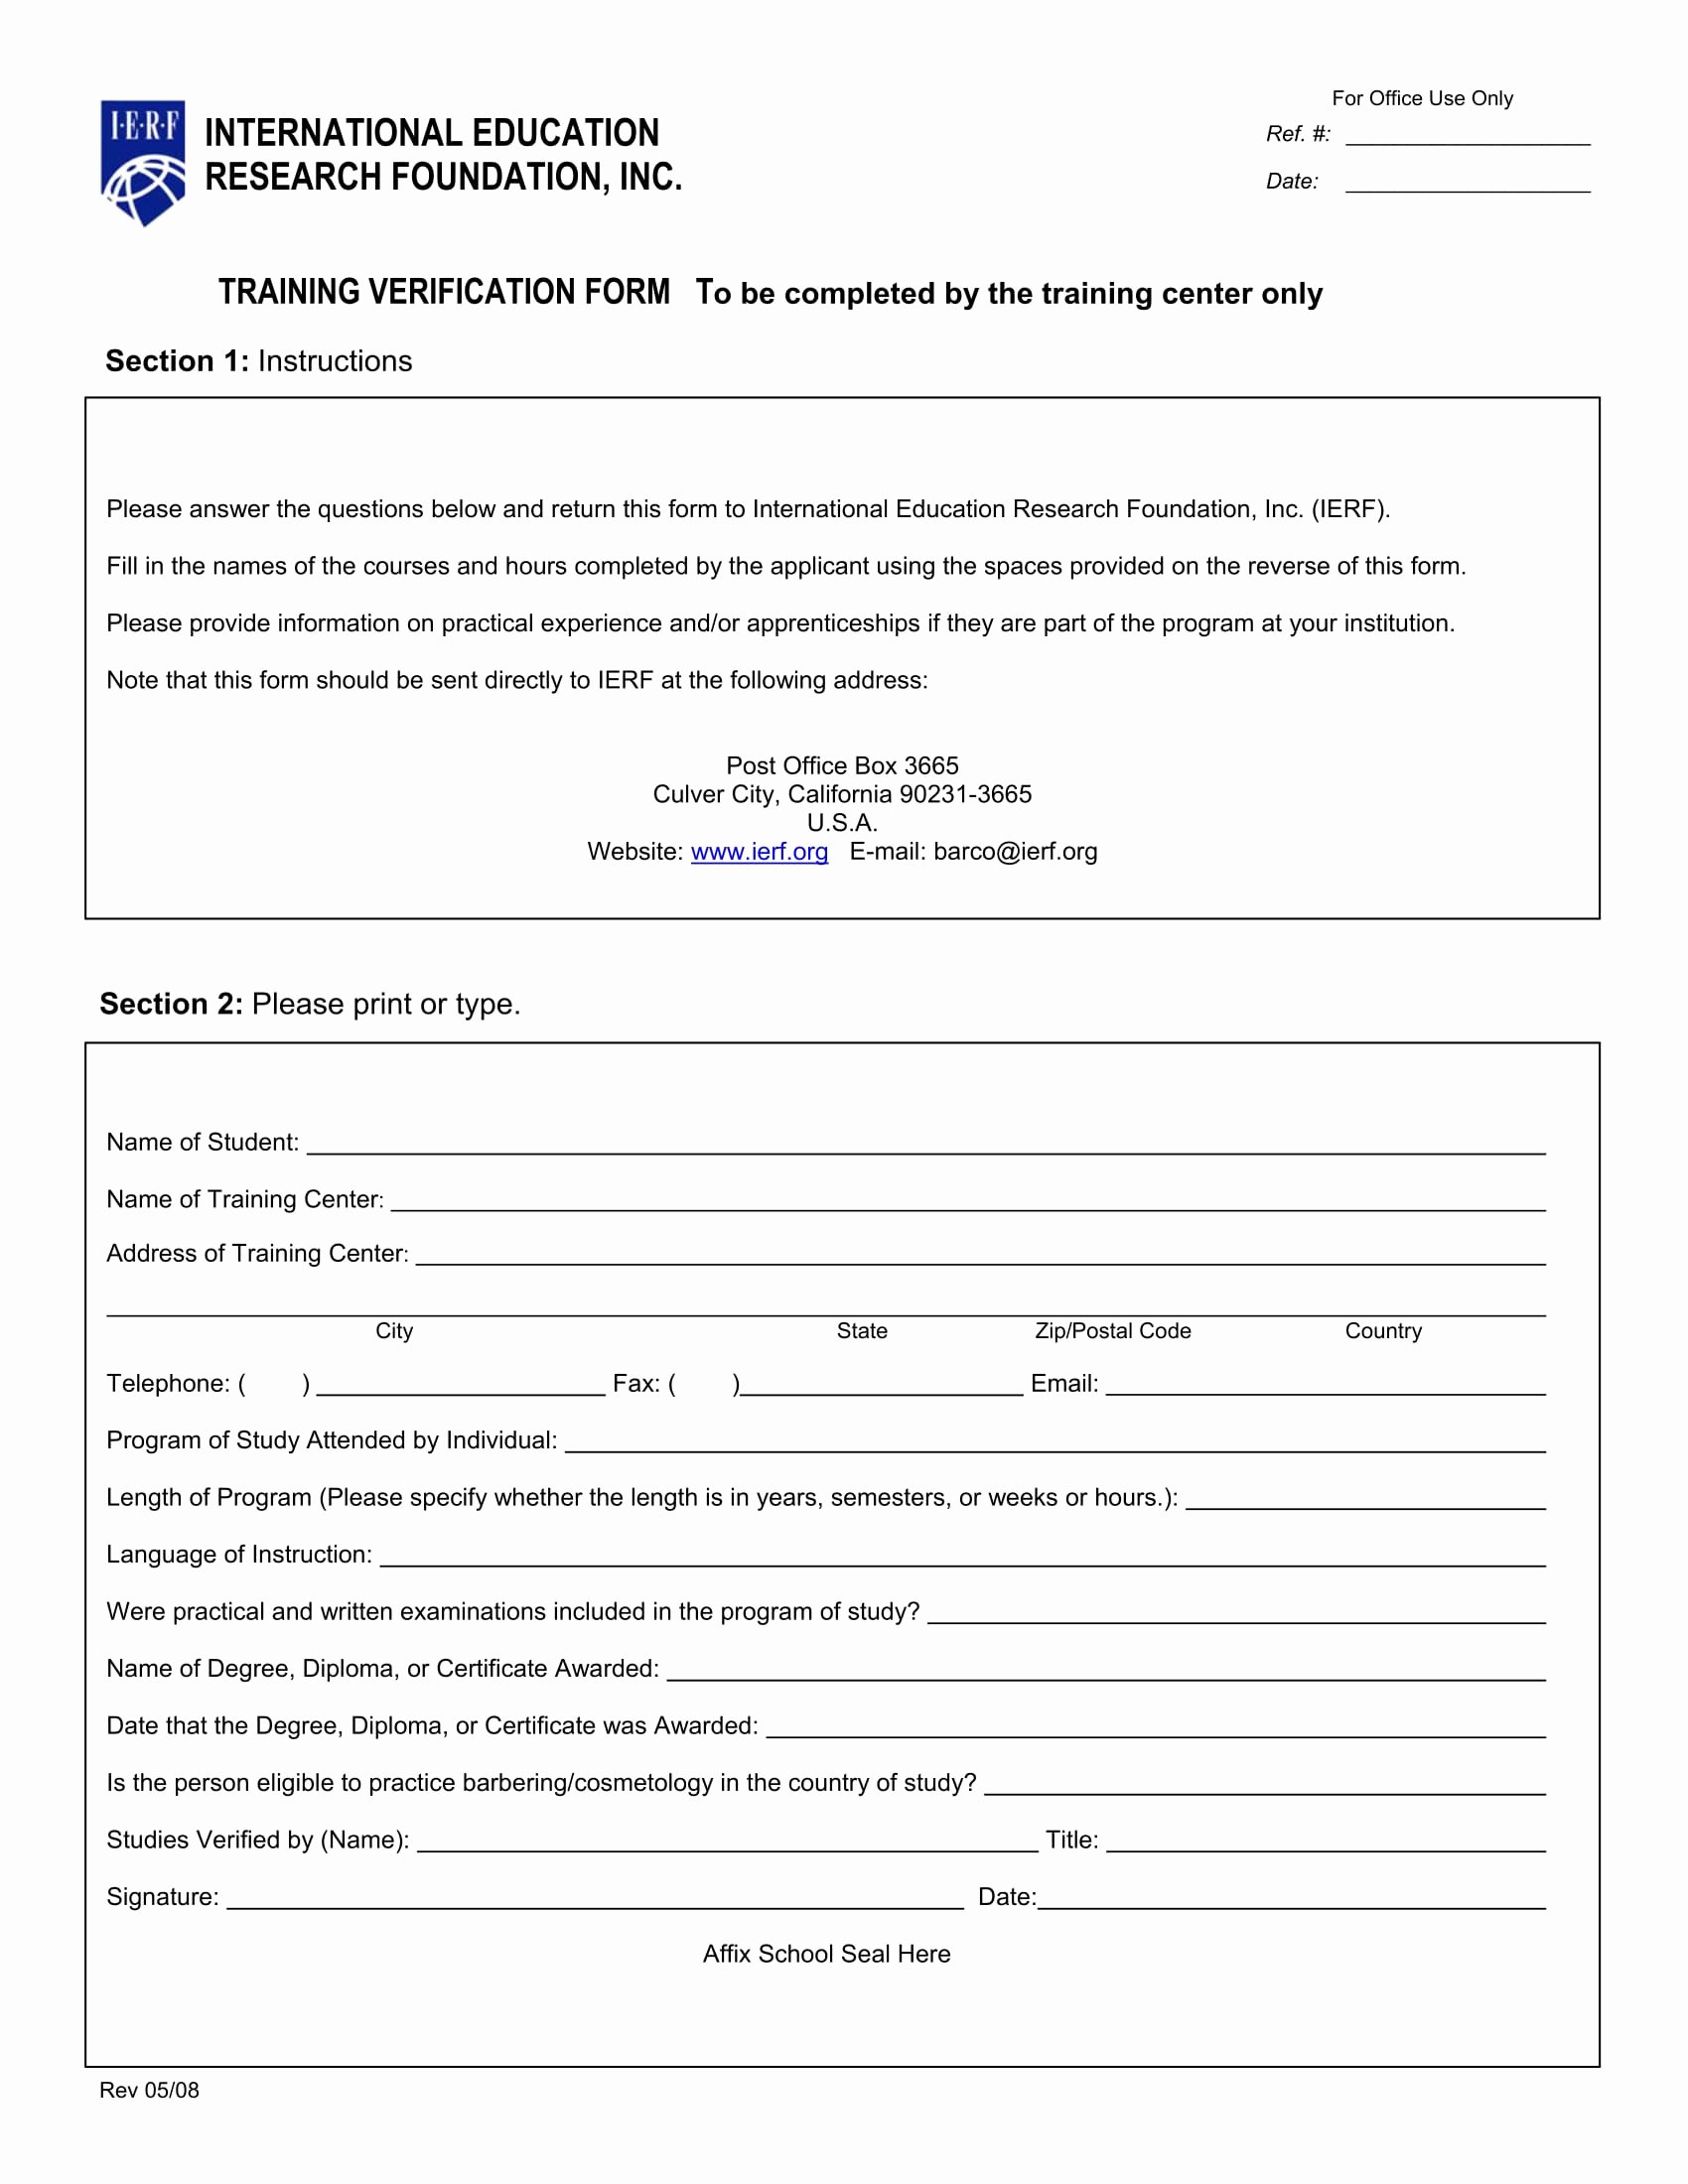 Training Request form Template Luxury Training Verification form Samples Definition Uses and